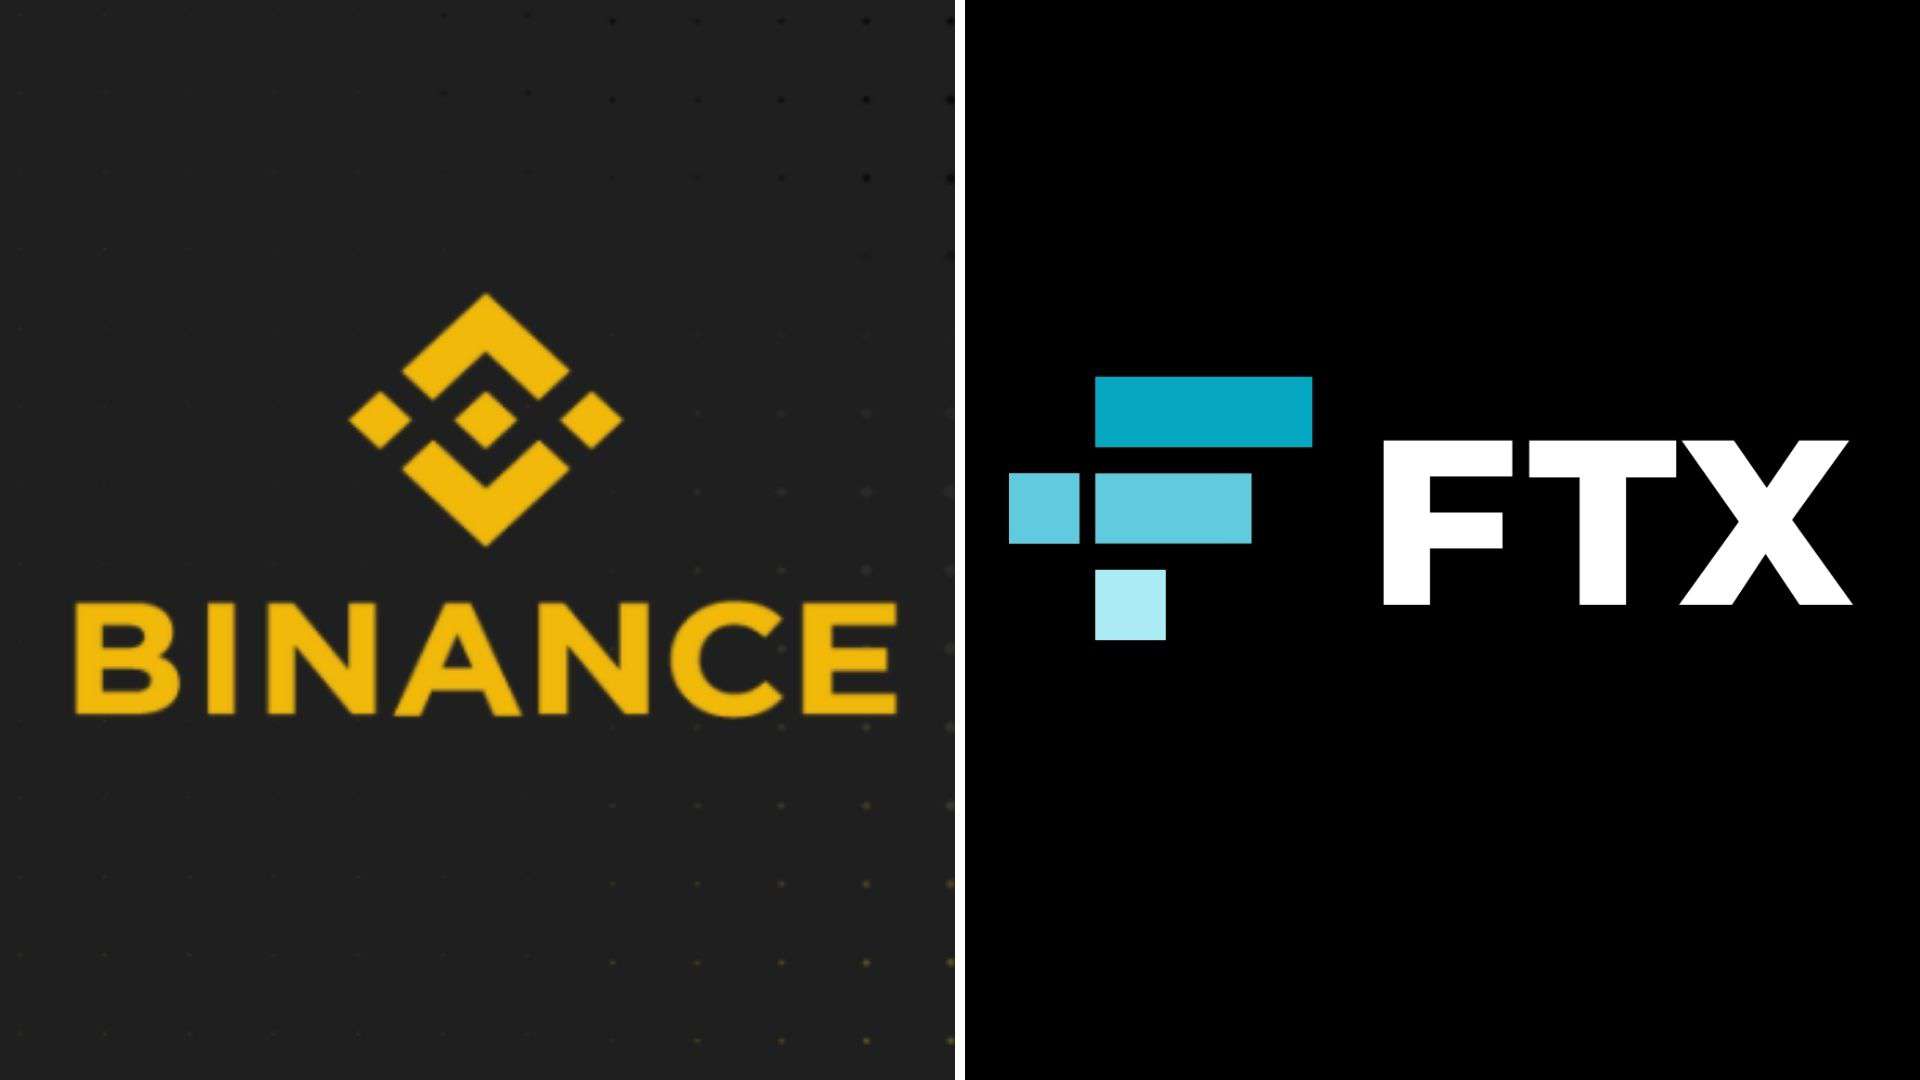 Binance Says It's Cutting Leverage Limit to 20x, a Day After FTX Announces the Same - CoinDesk